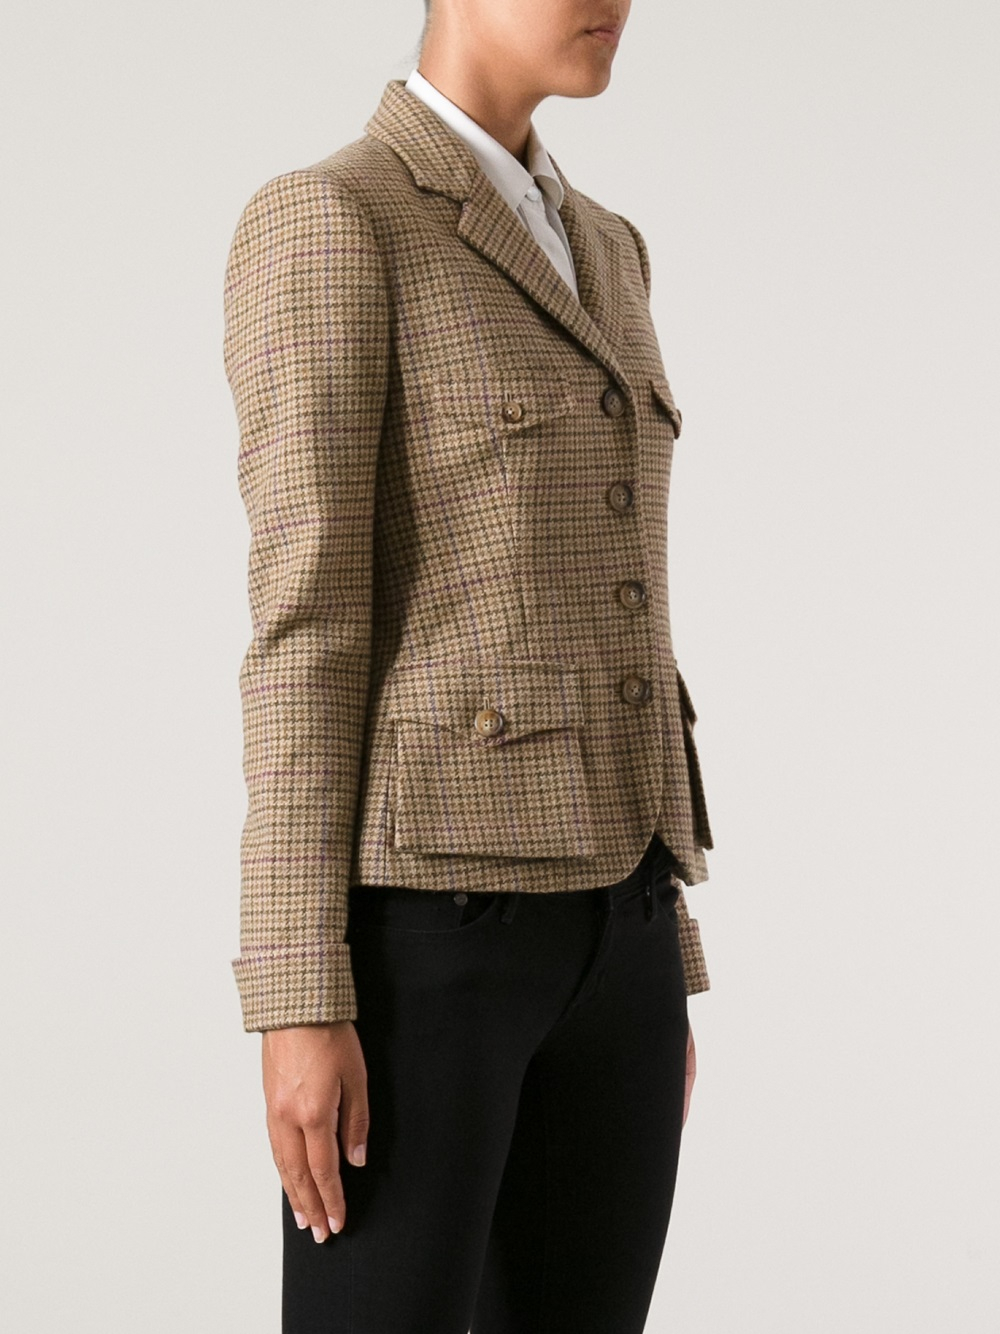 Lyst - Ralph Lauren Blue Label Blue Checked Hunting Jacket in Brown